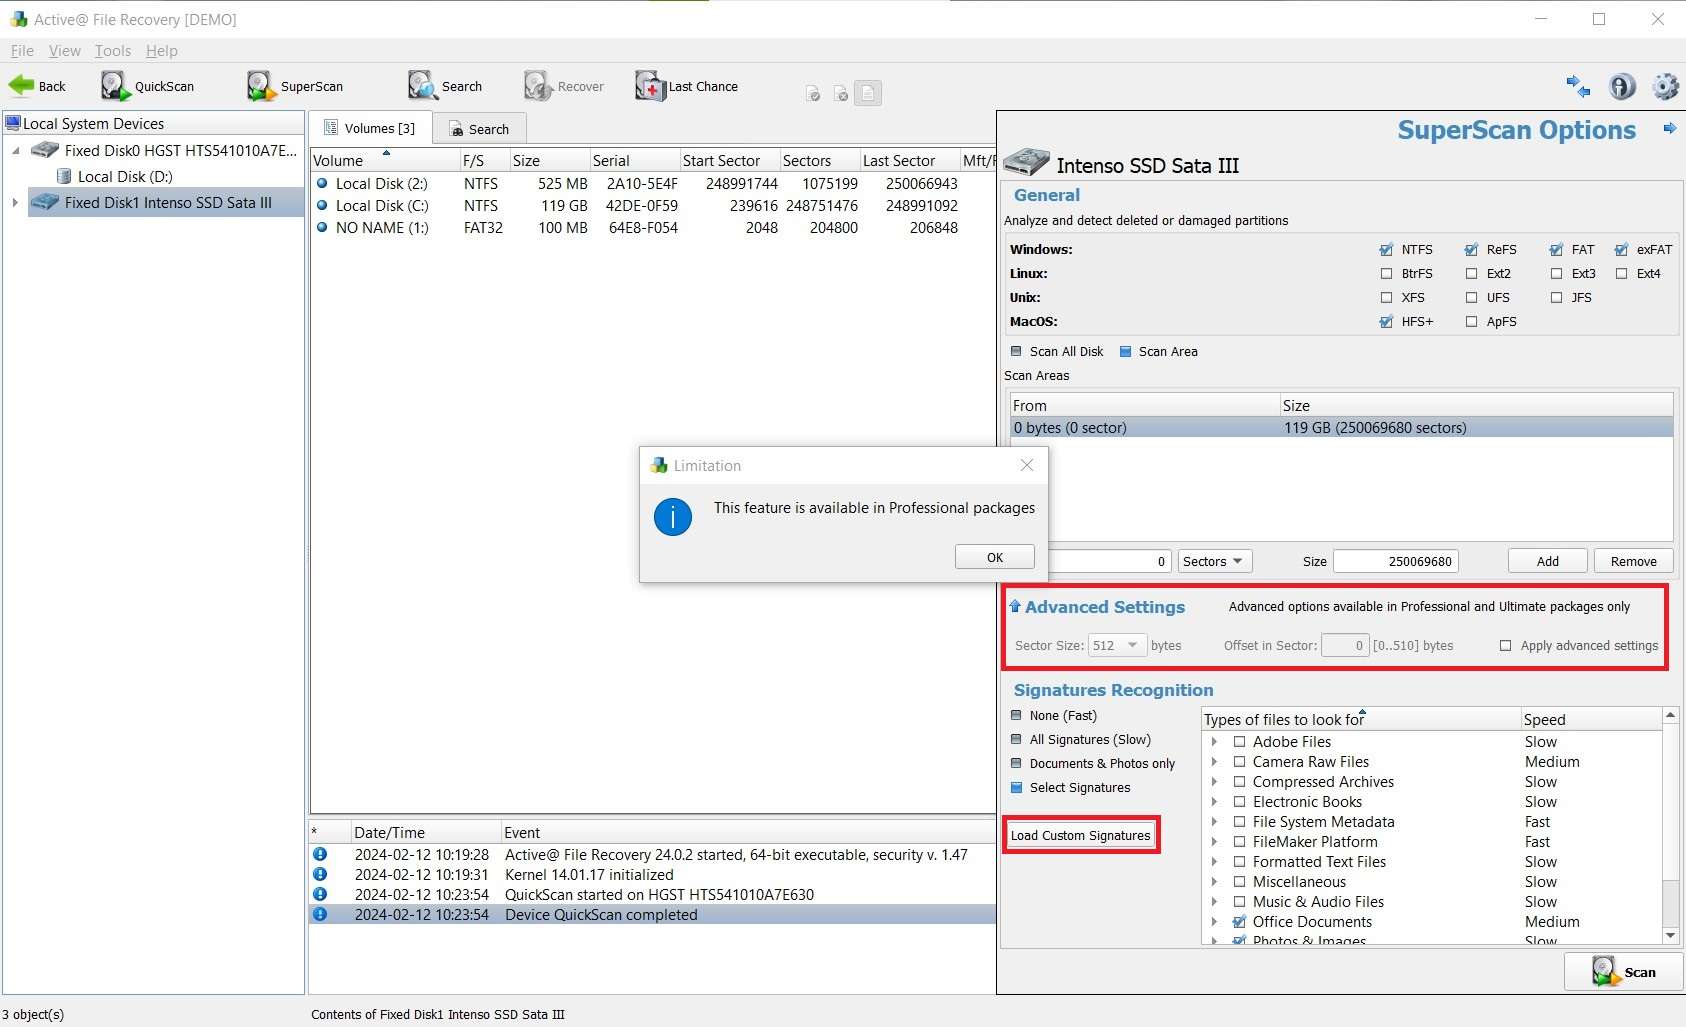 customize advanced settings in active file recovery 